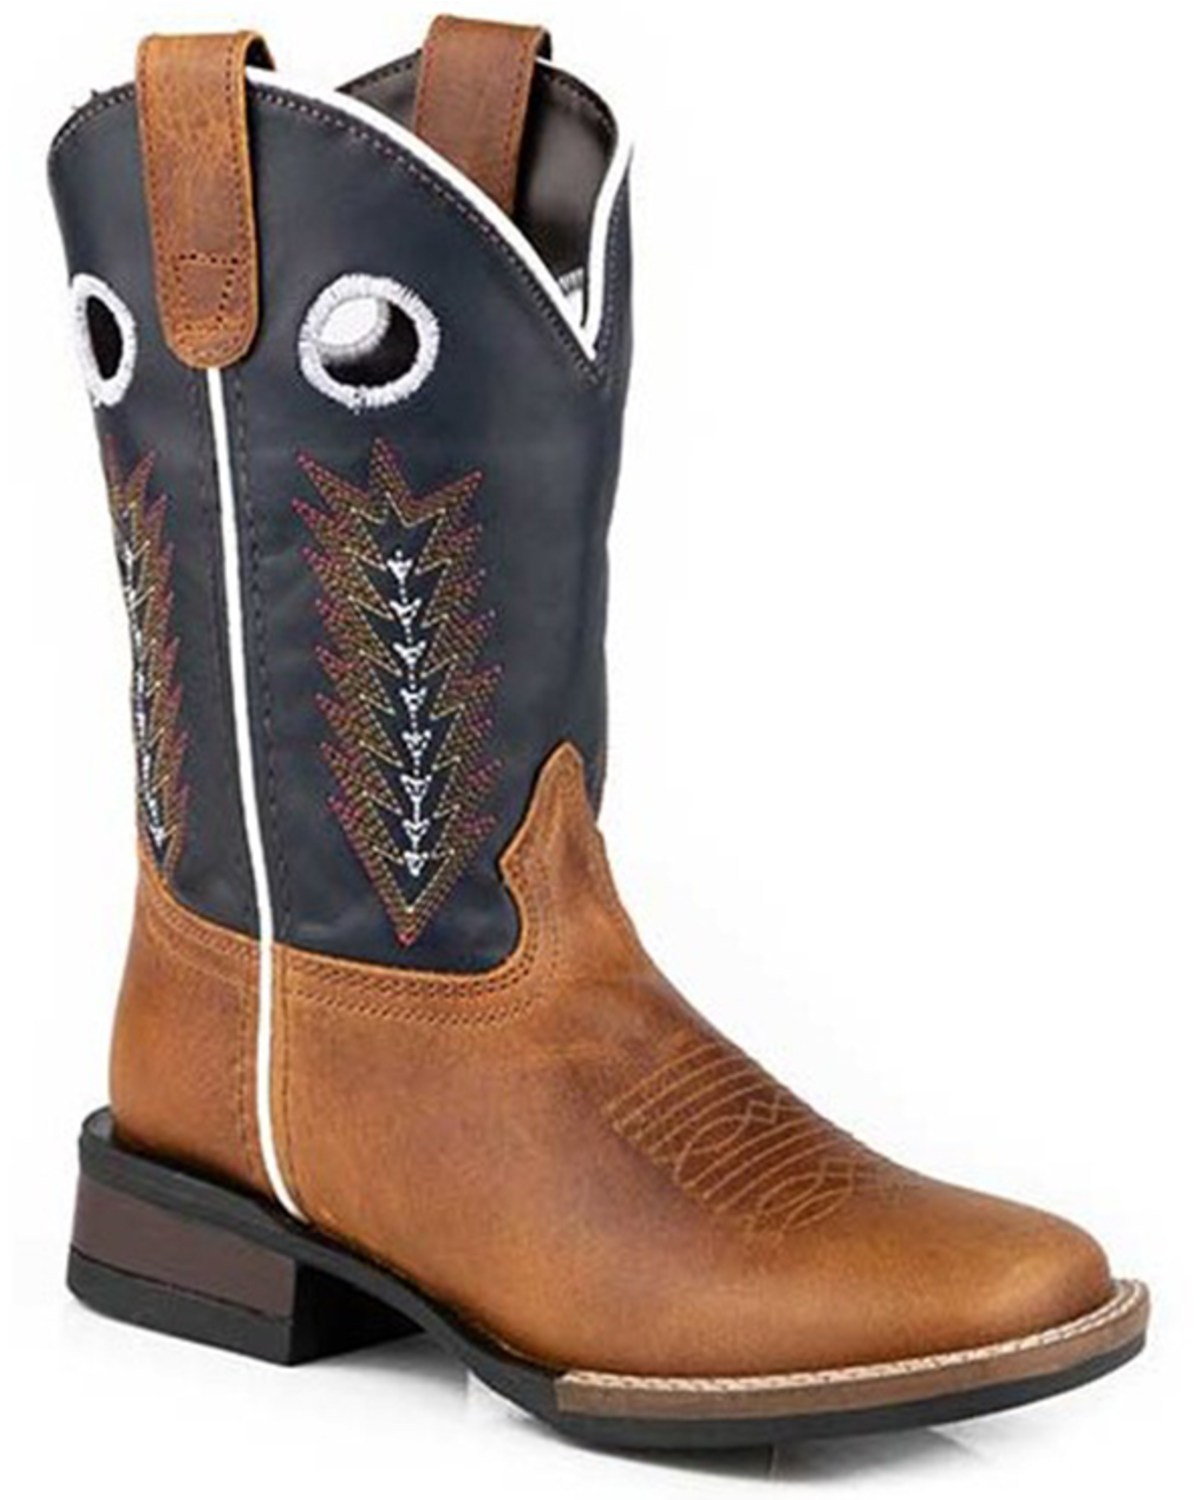 Roper Boys' James Western Boots - Square Toe